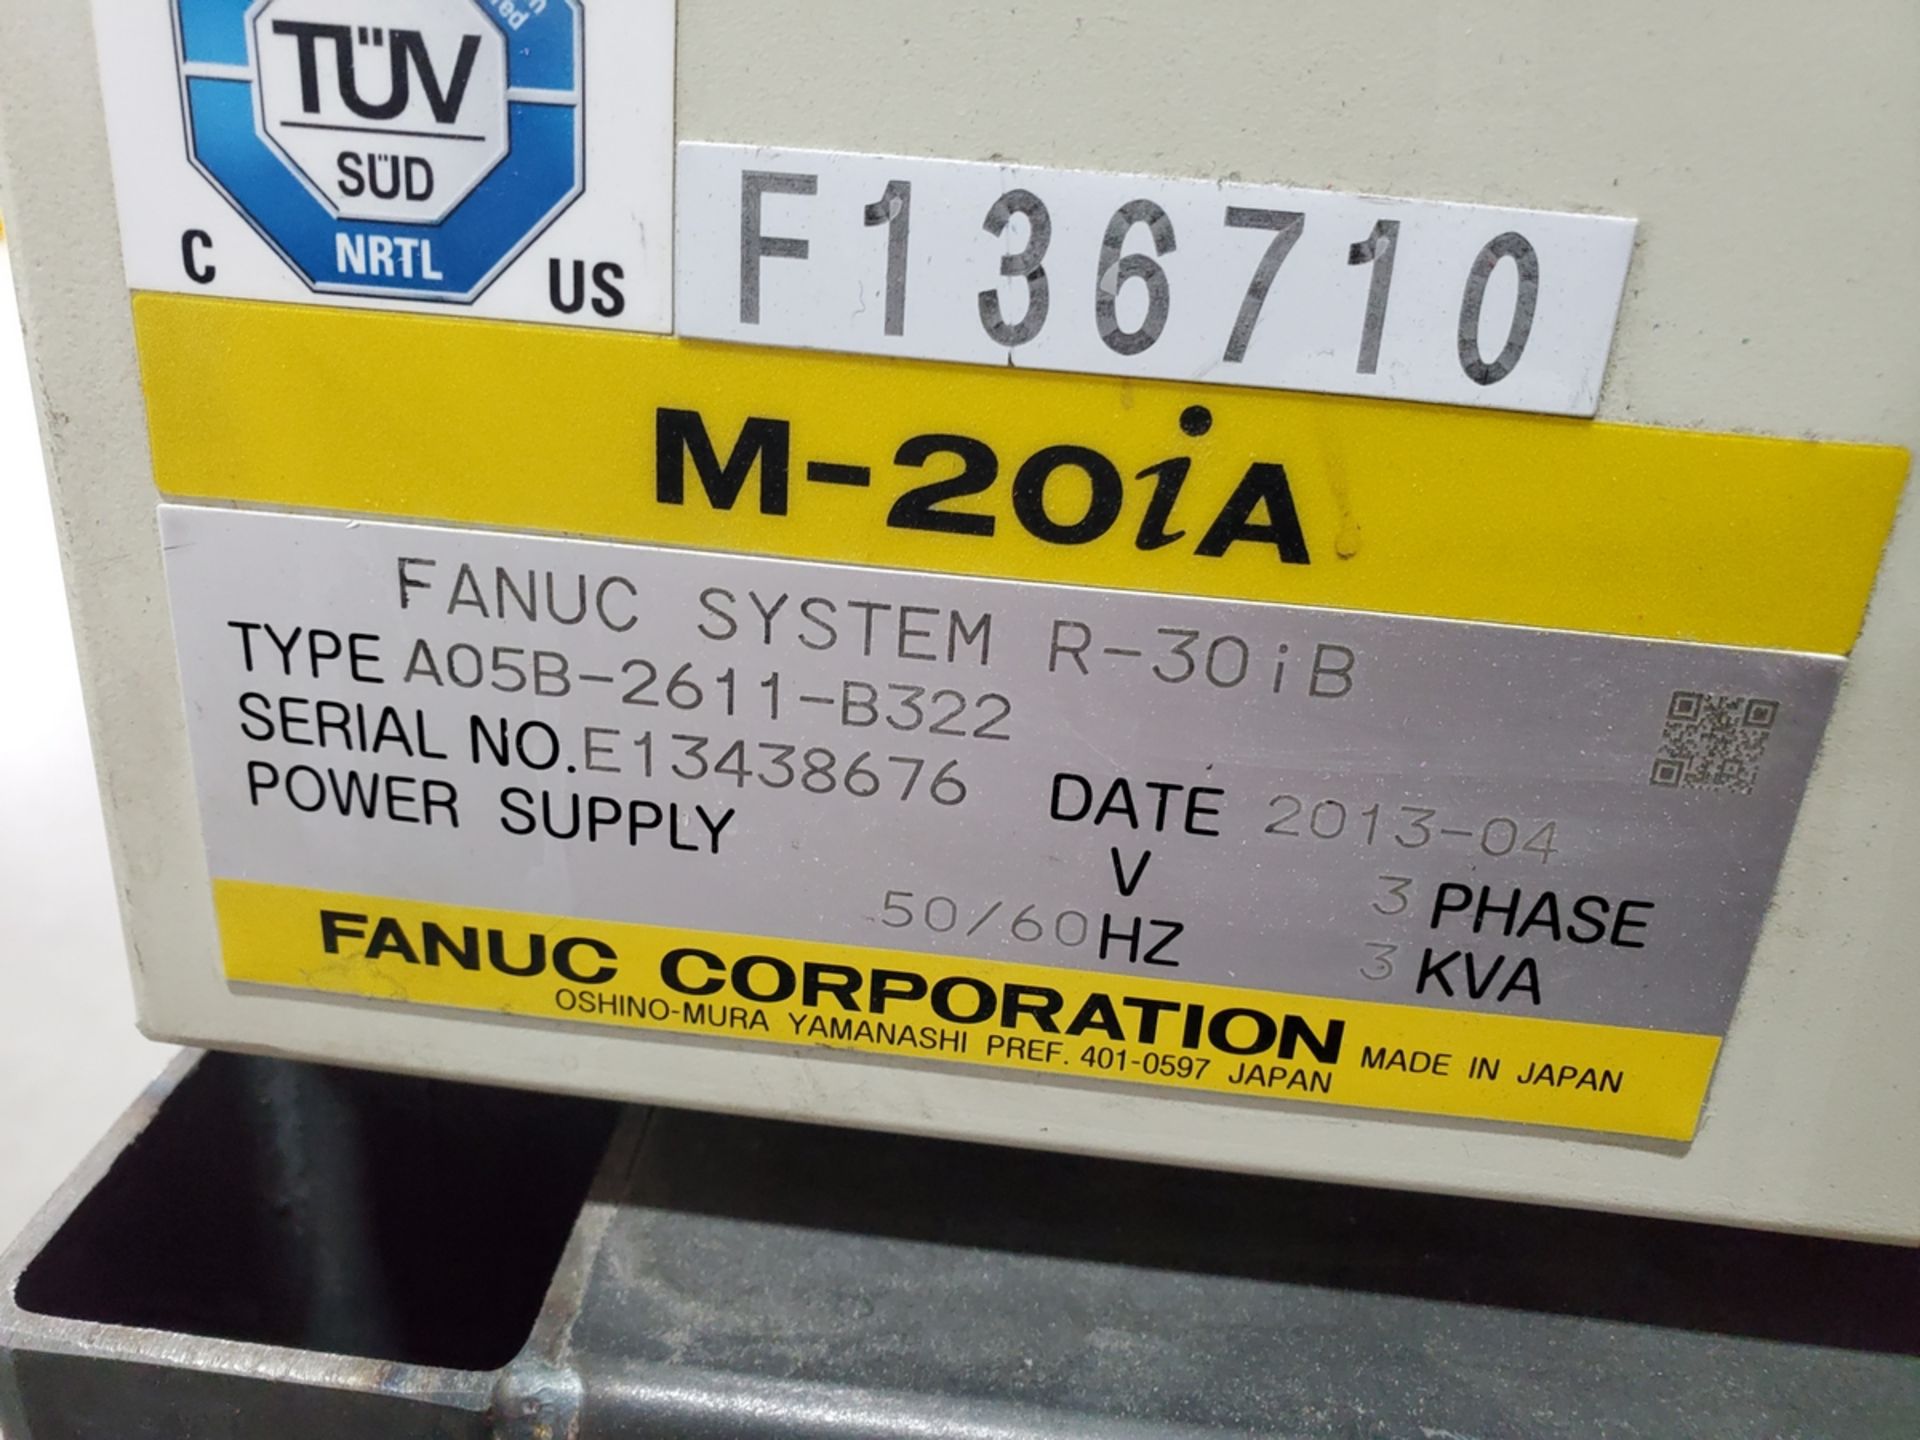 Fanuc M-20iA 6-Axis Robot, New in 2013 - Image 9 of 9